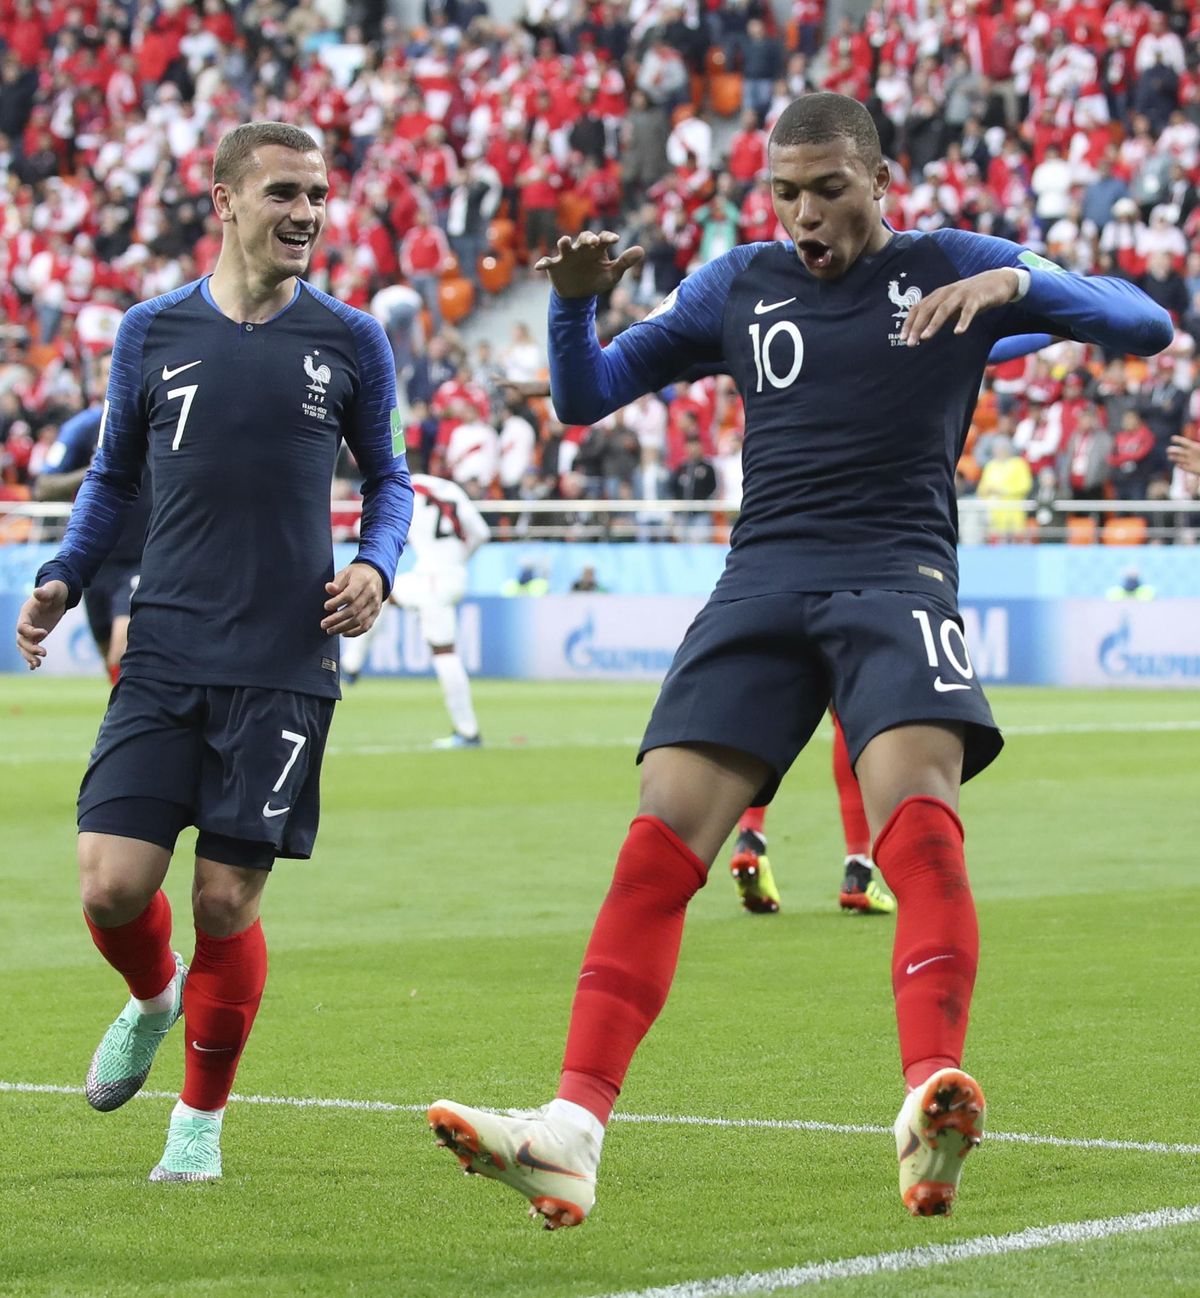 France’s Kylian Mbappe, left celebrates with teammate France’s Antoine Griezmann after scoring the opening goal of the game during the Group C match between France and Peru at the 2018 soccer World Cup in the Yekaterinburg Arena in Yekaterinburg, Russia, Thursday, June 21, 2018. (David Vincent / Associated Press)